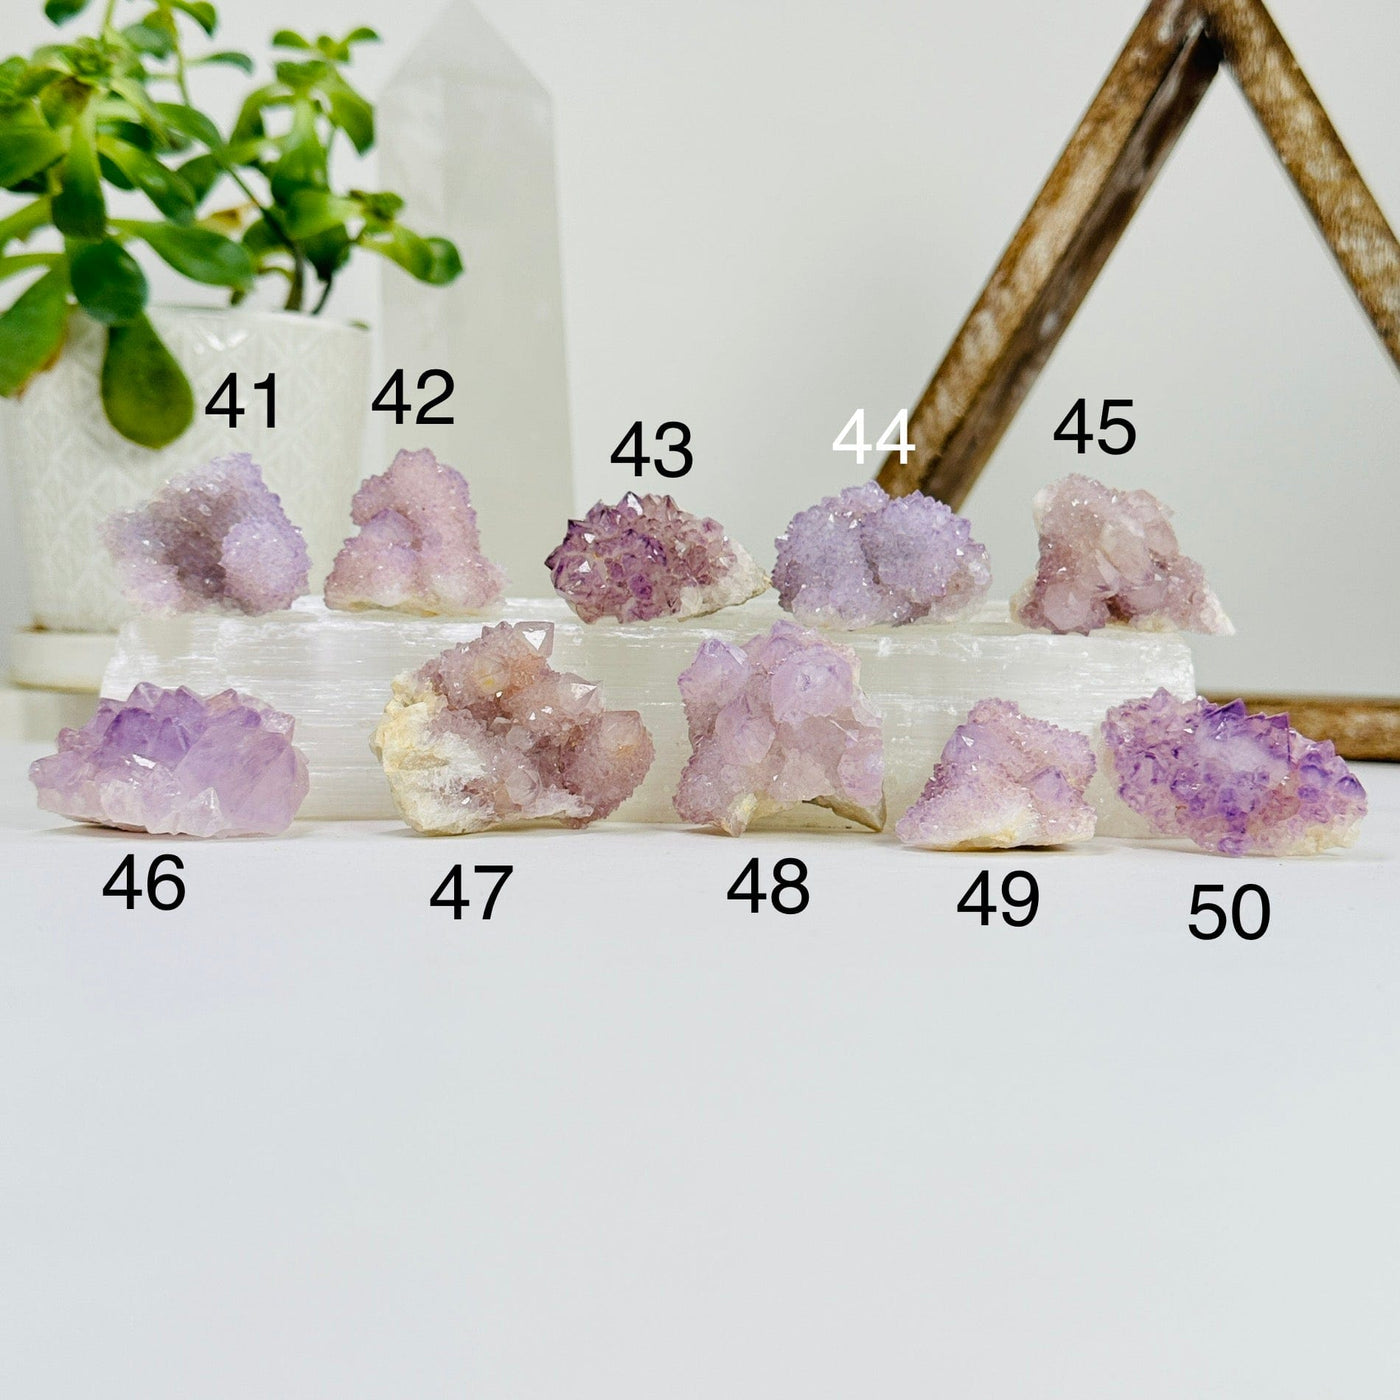 variants 41-50 of spirit quartz with decorations in the background